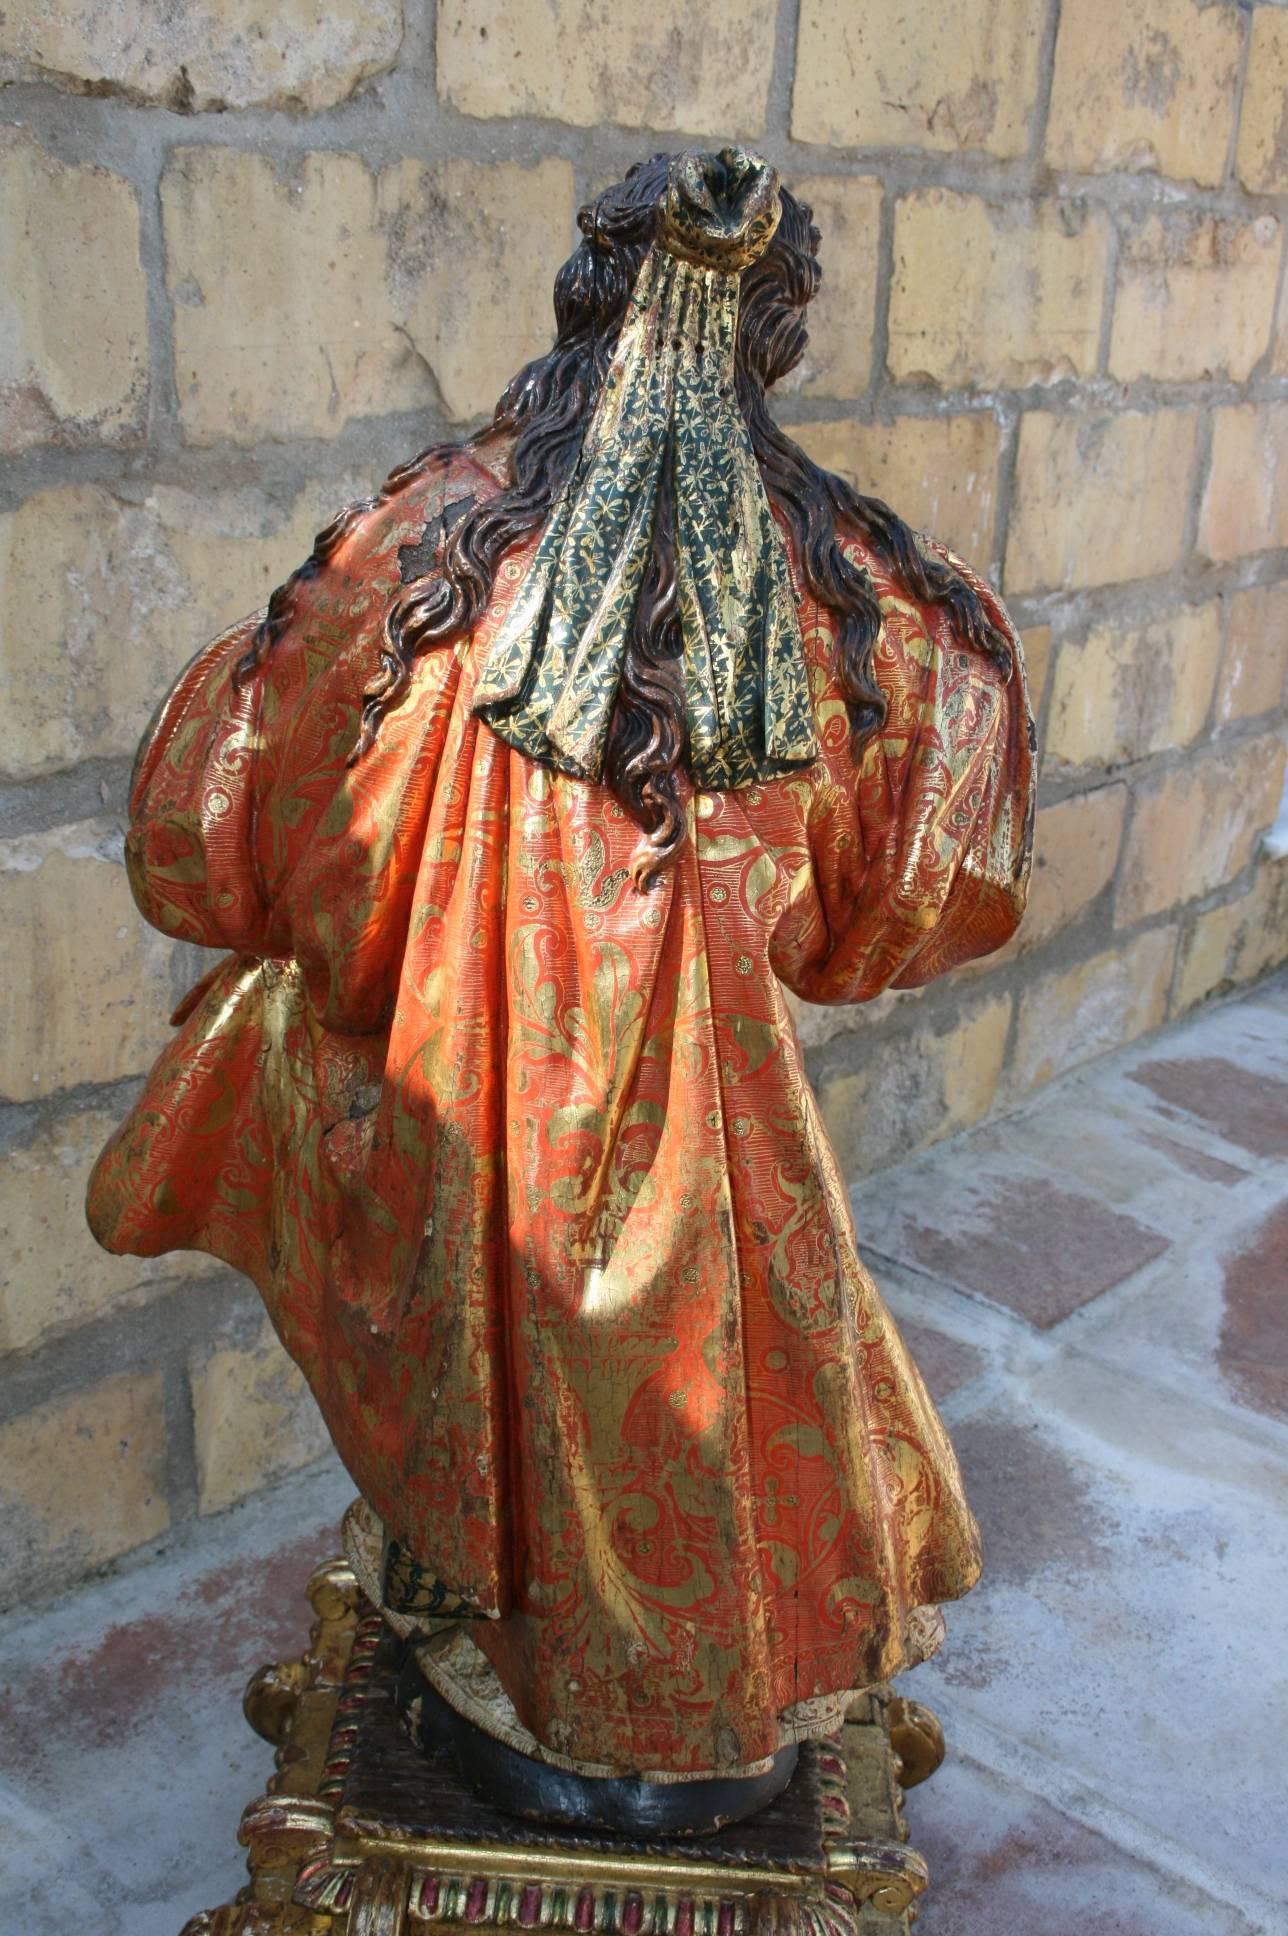 Polychrome Sculpture of the 17th Century, from the Castilian Area 3